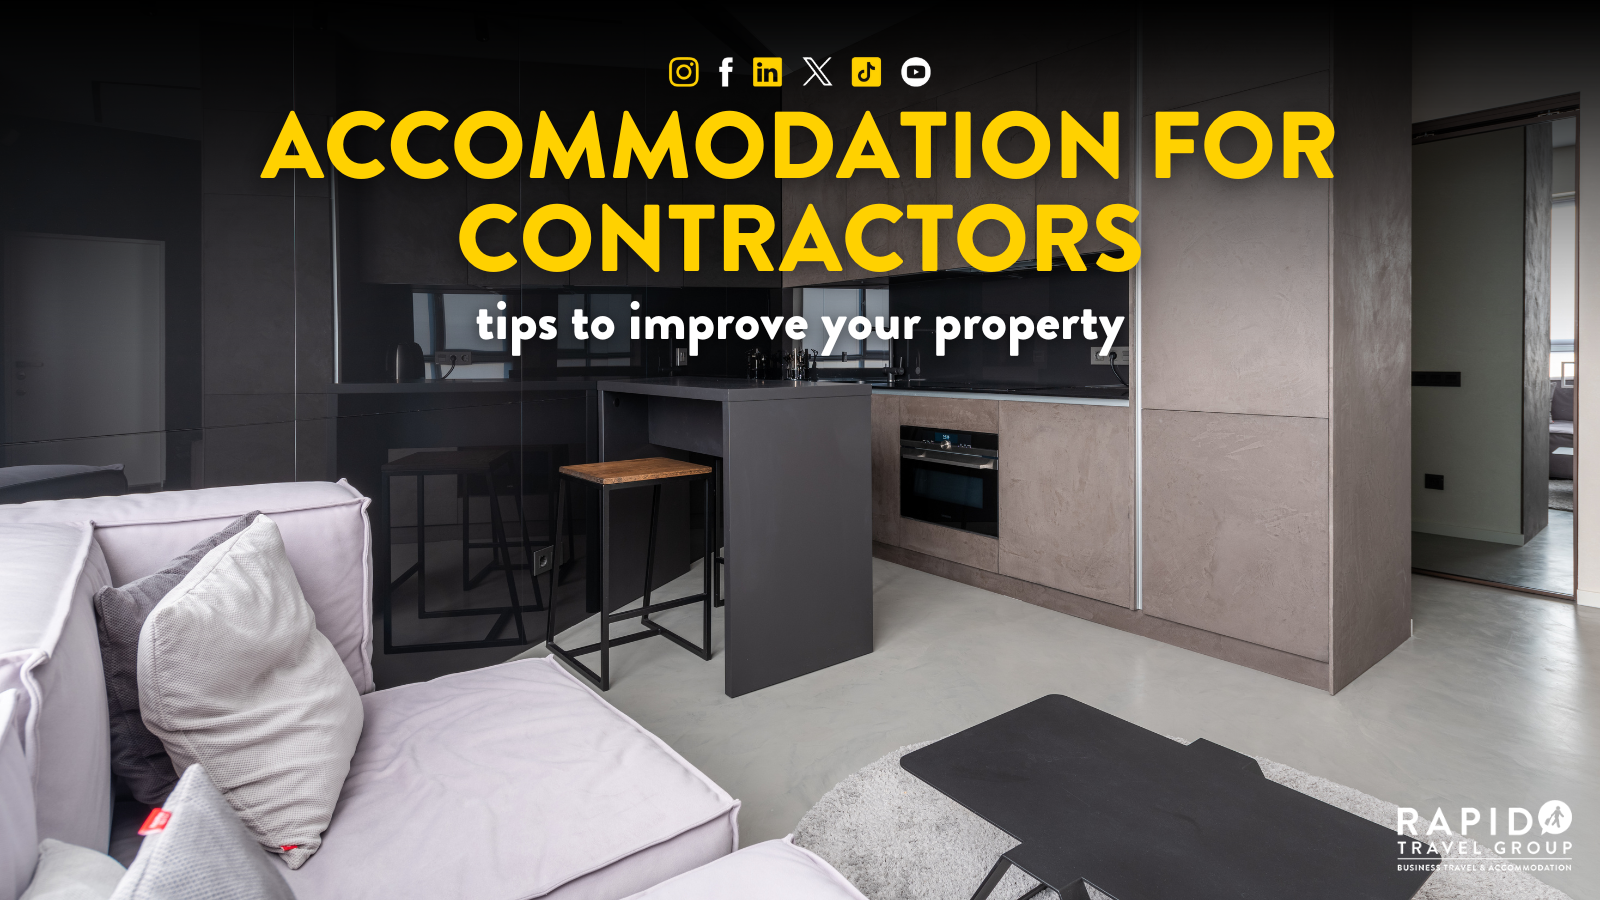 Accommodation For Contractors: Tips To Improve Your Property